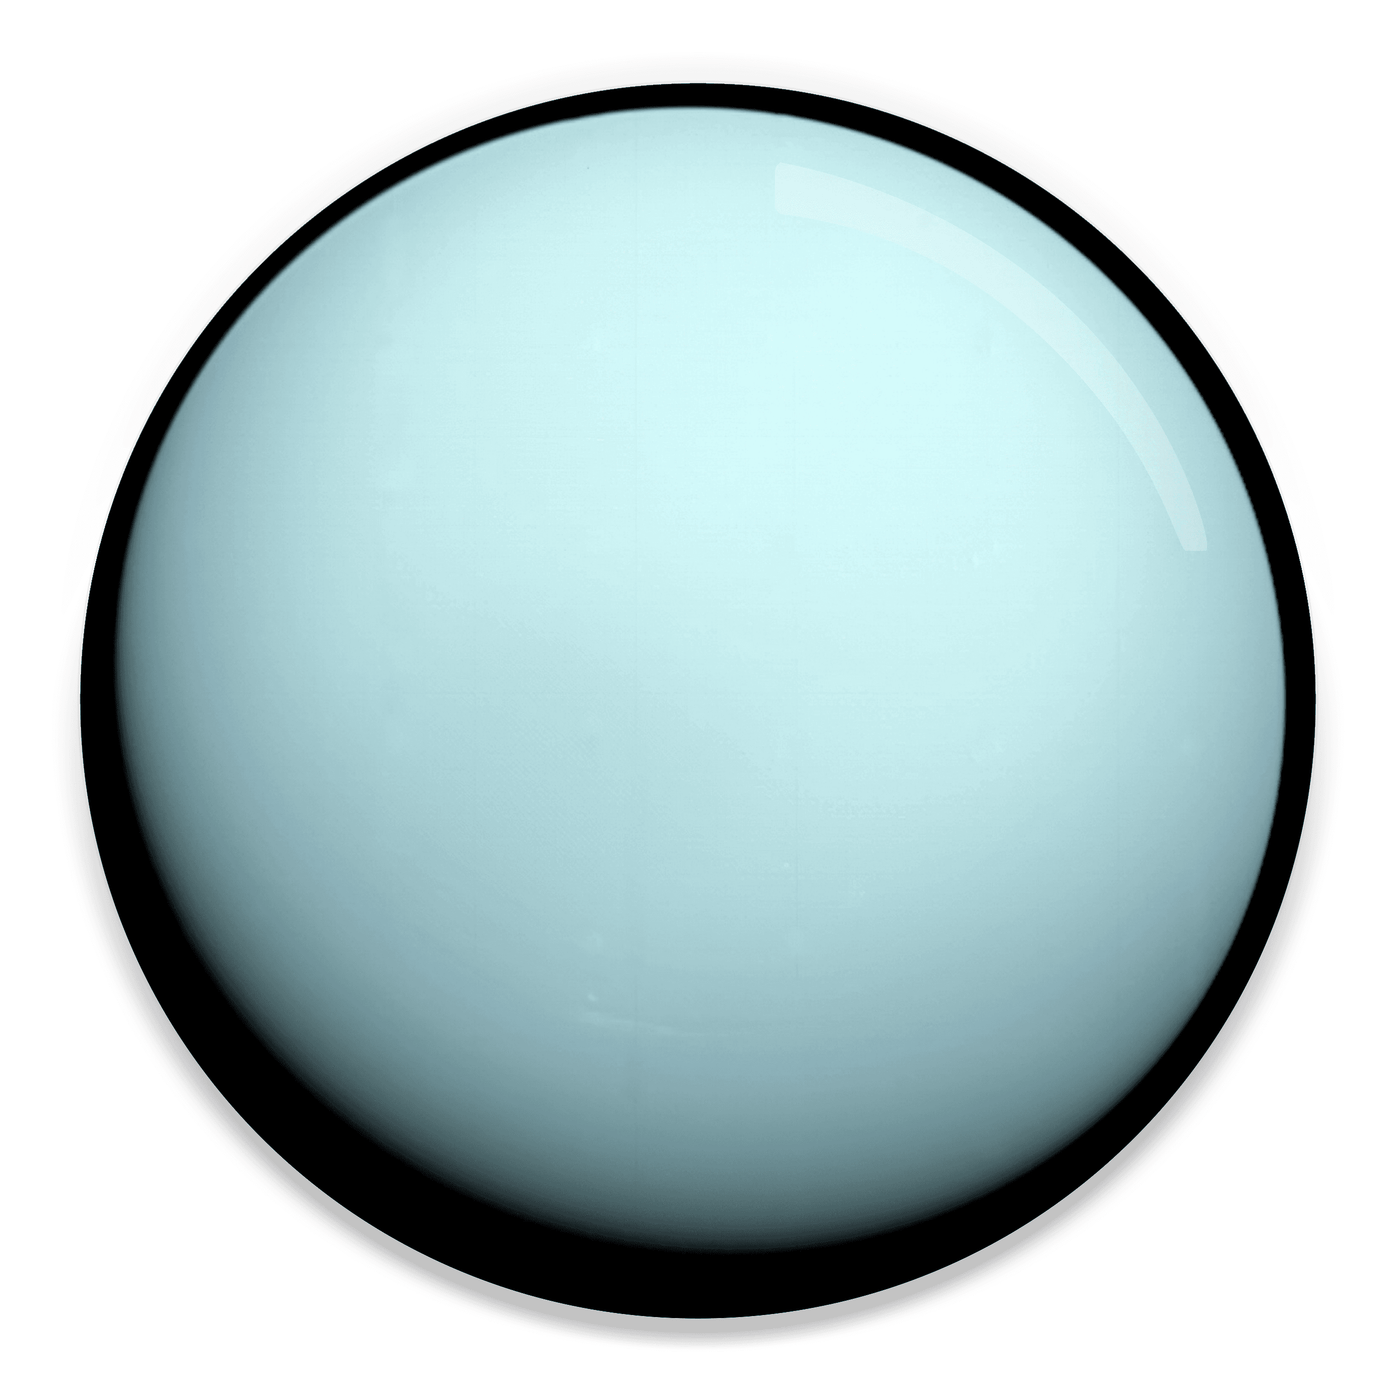 2.25 inch round colorful magnet with image of Uranus